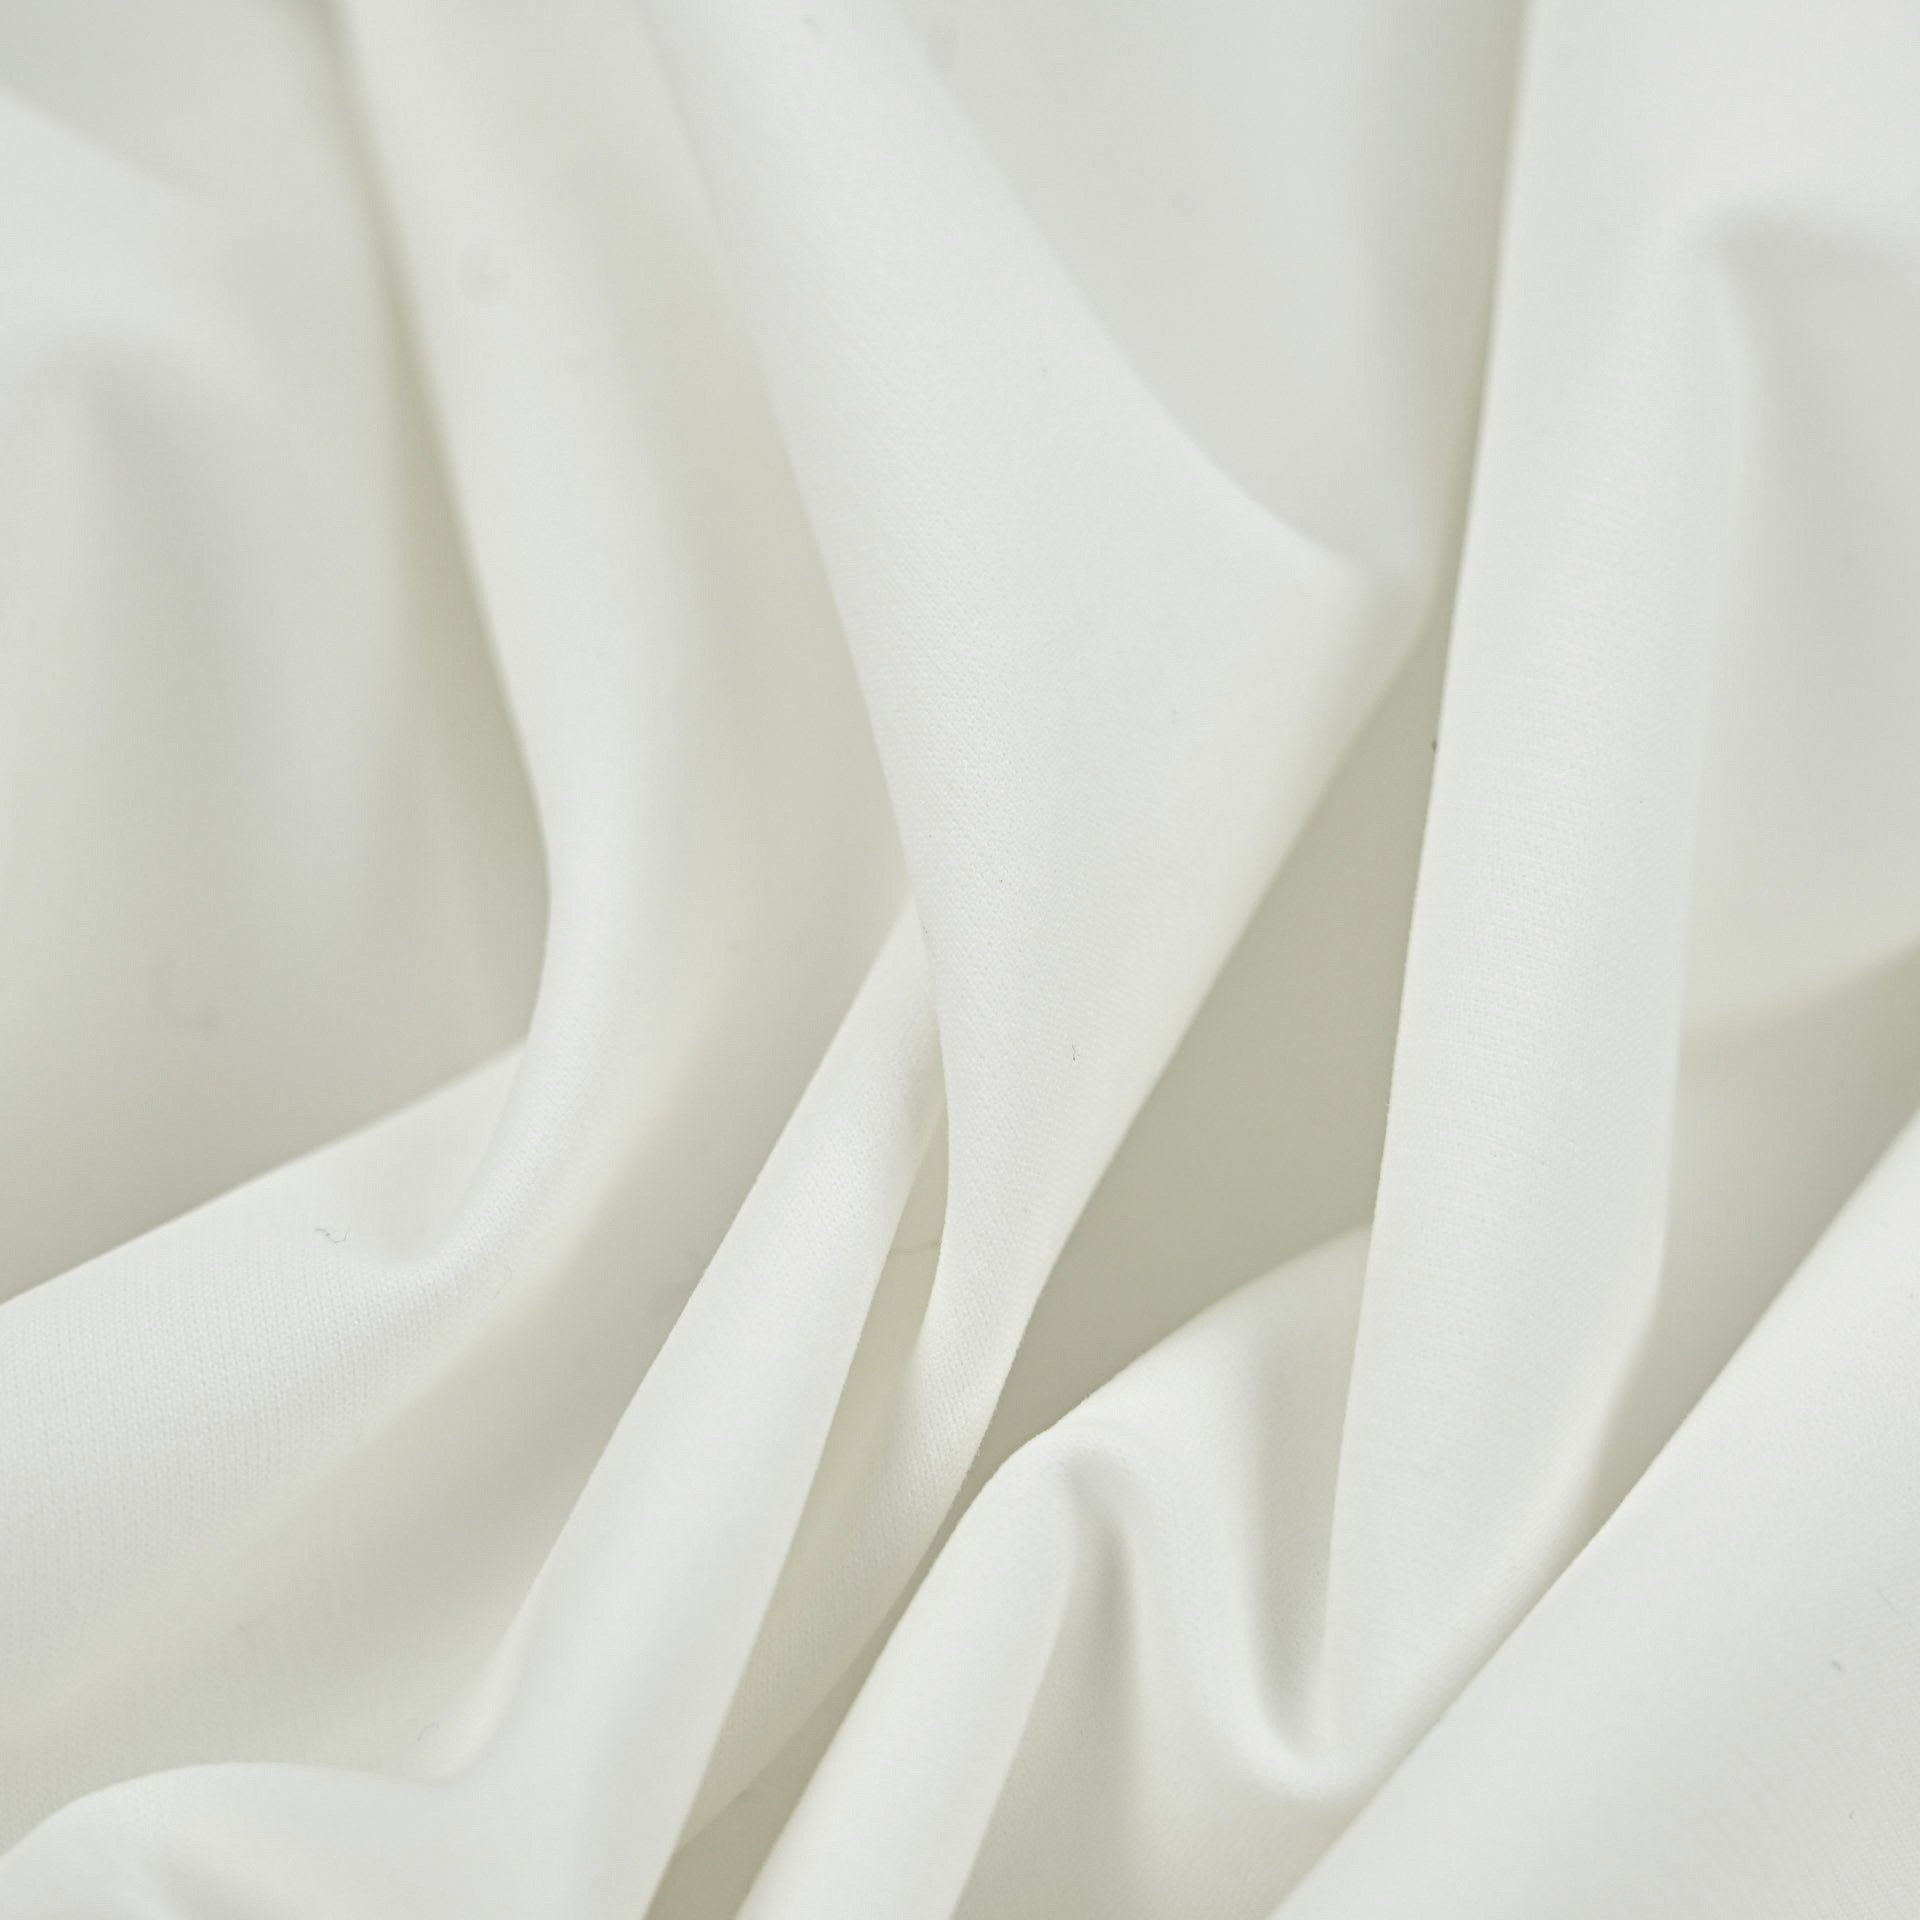 White Mid-Weight Cotton Fabric 97620